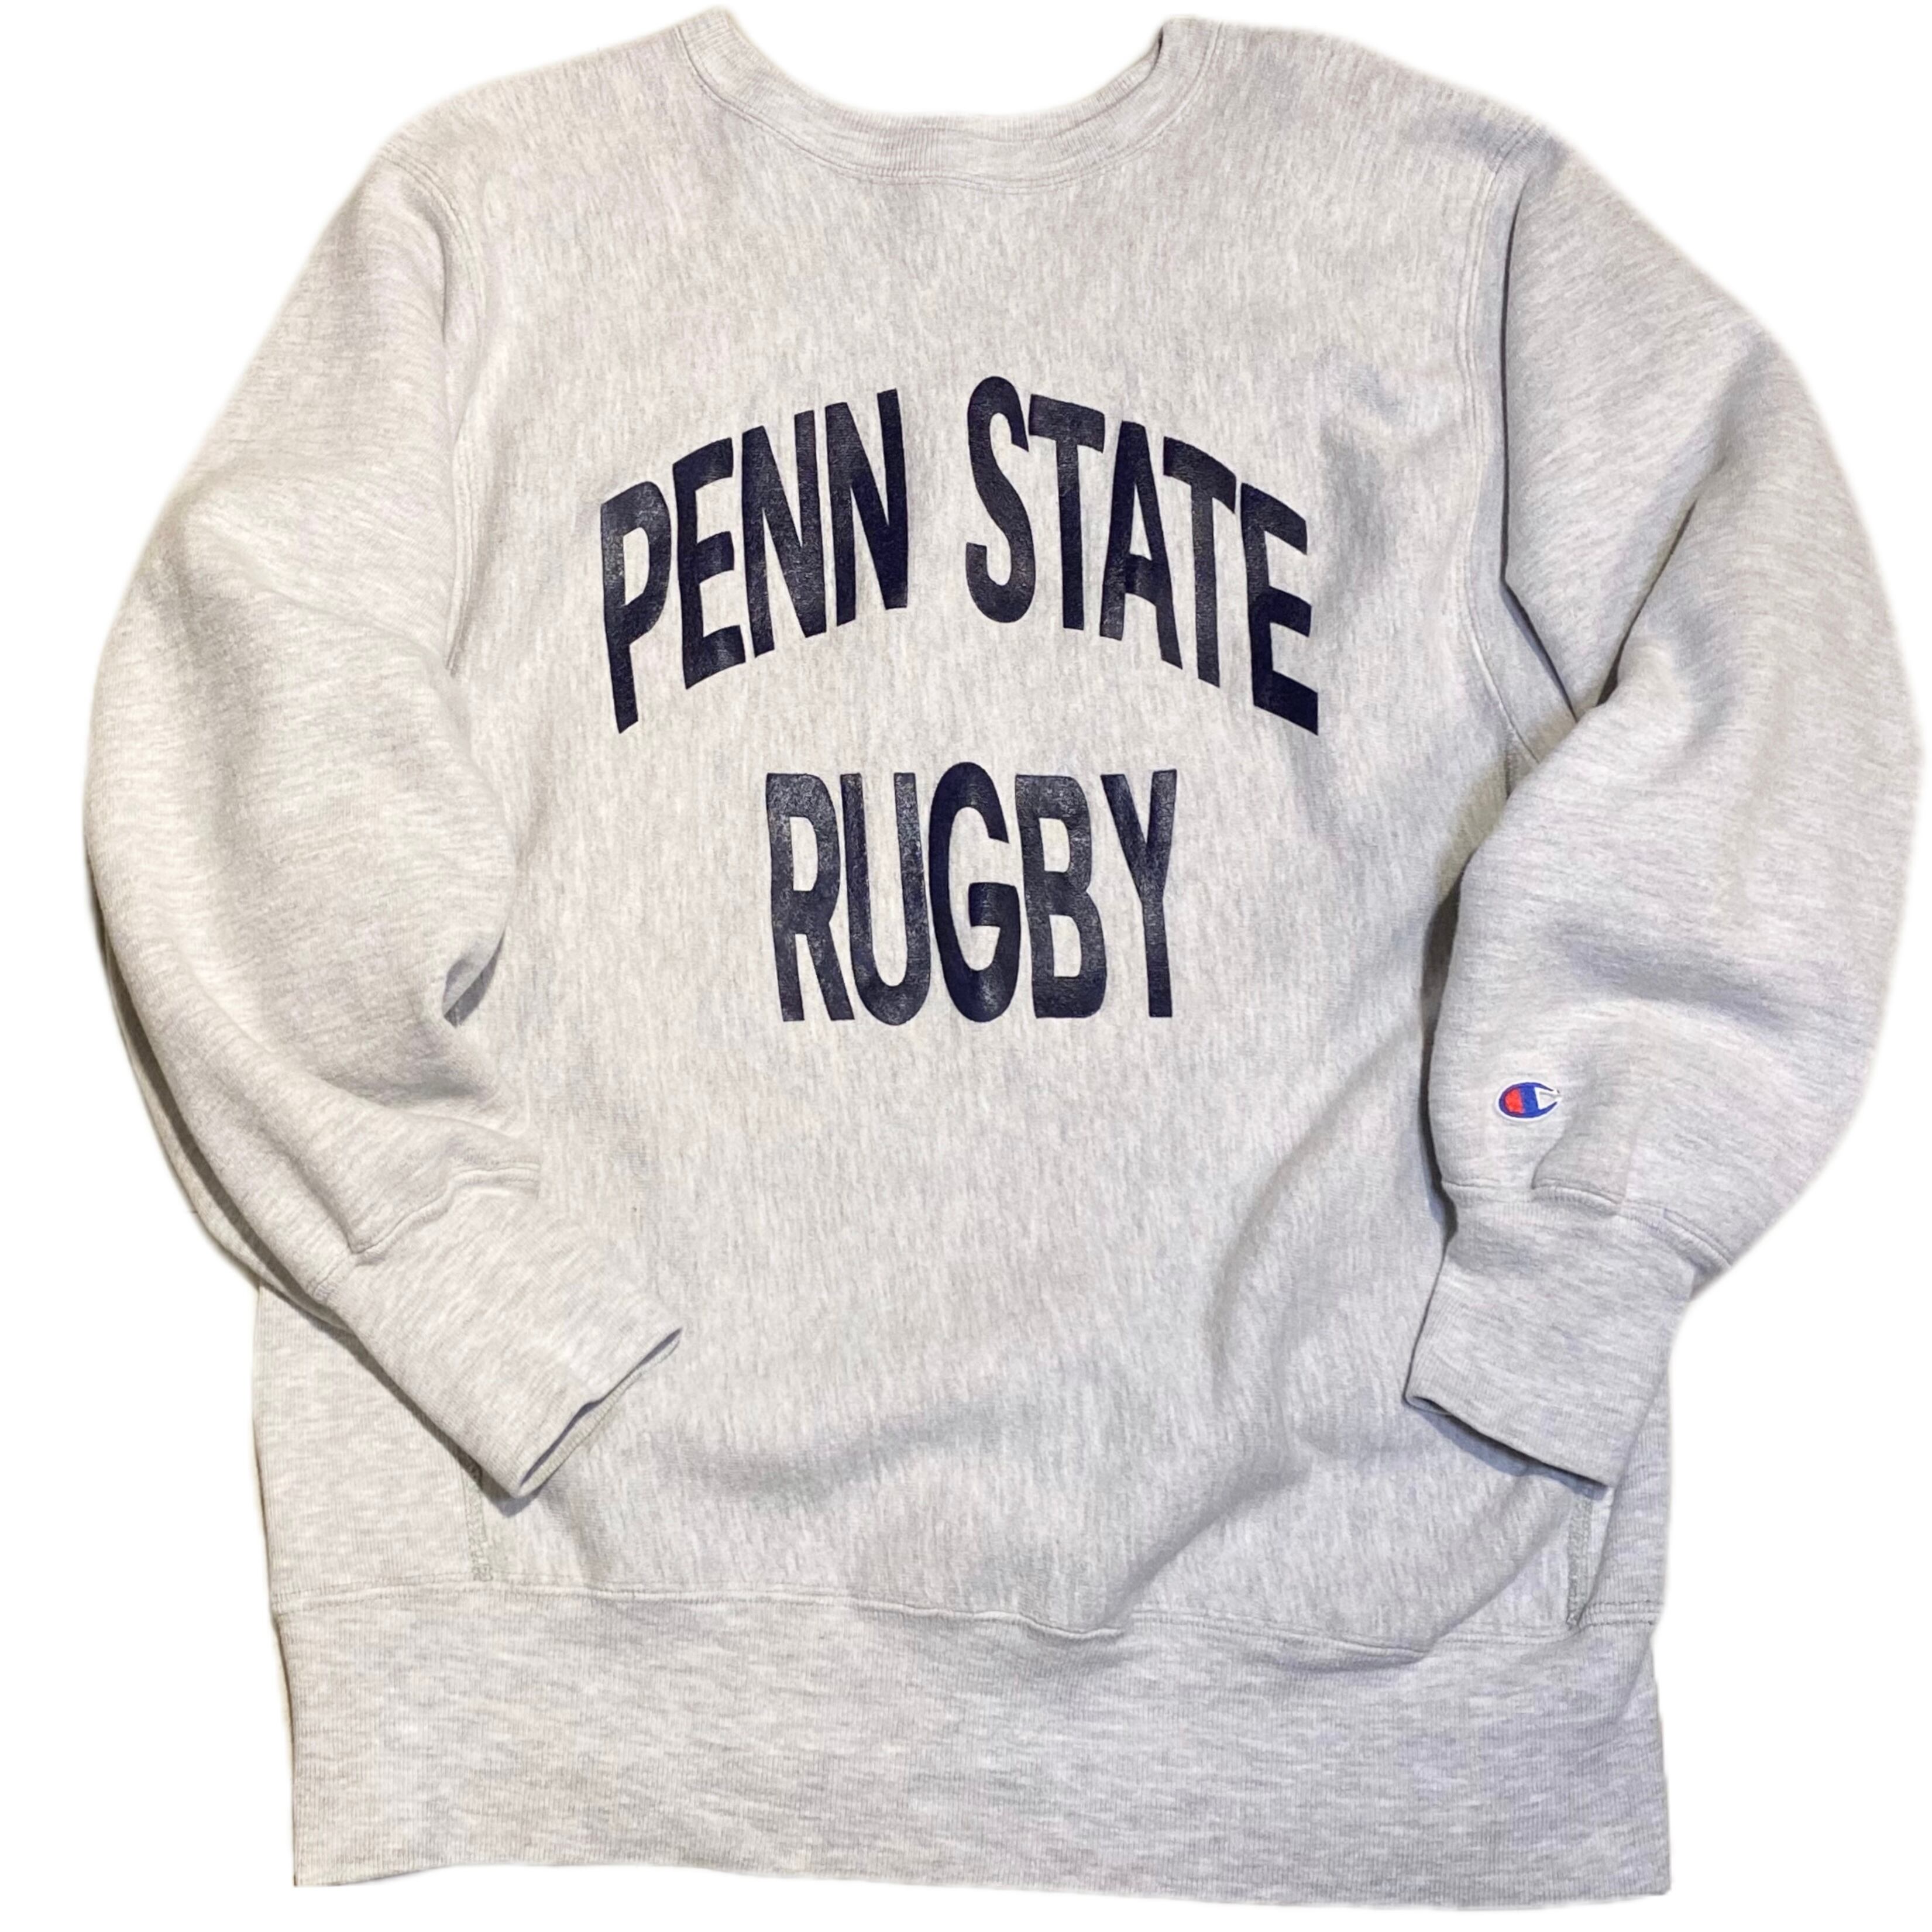 90s チャンピオン Champion リバースウィーブ スウェット【XL】PENN STATE RUGBY ラグビー 2段プリント MADE IN  USA RW-290 | BACK IN THE DAYZ. powered by BASE